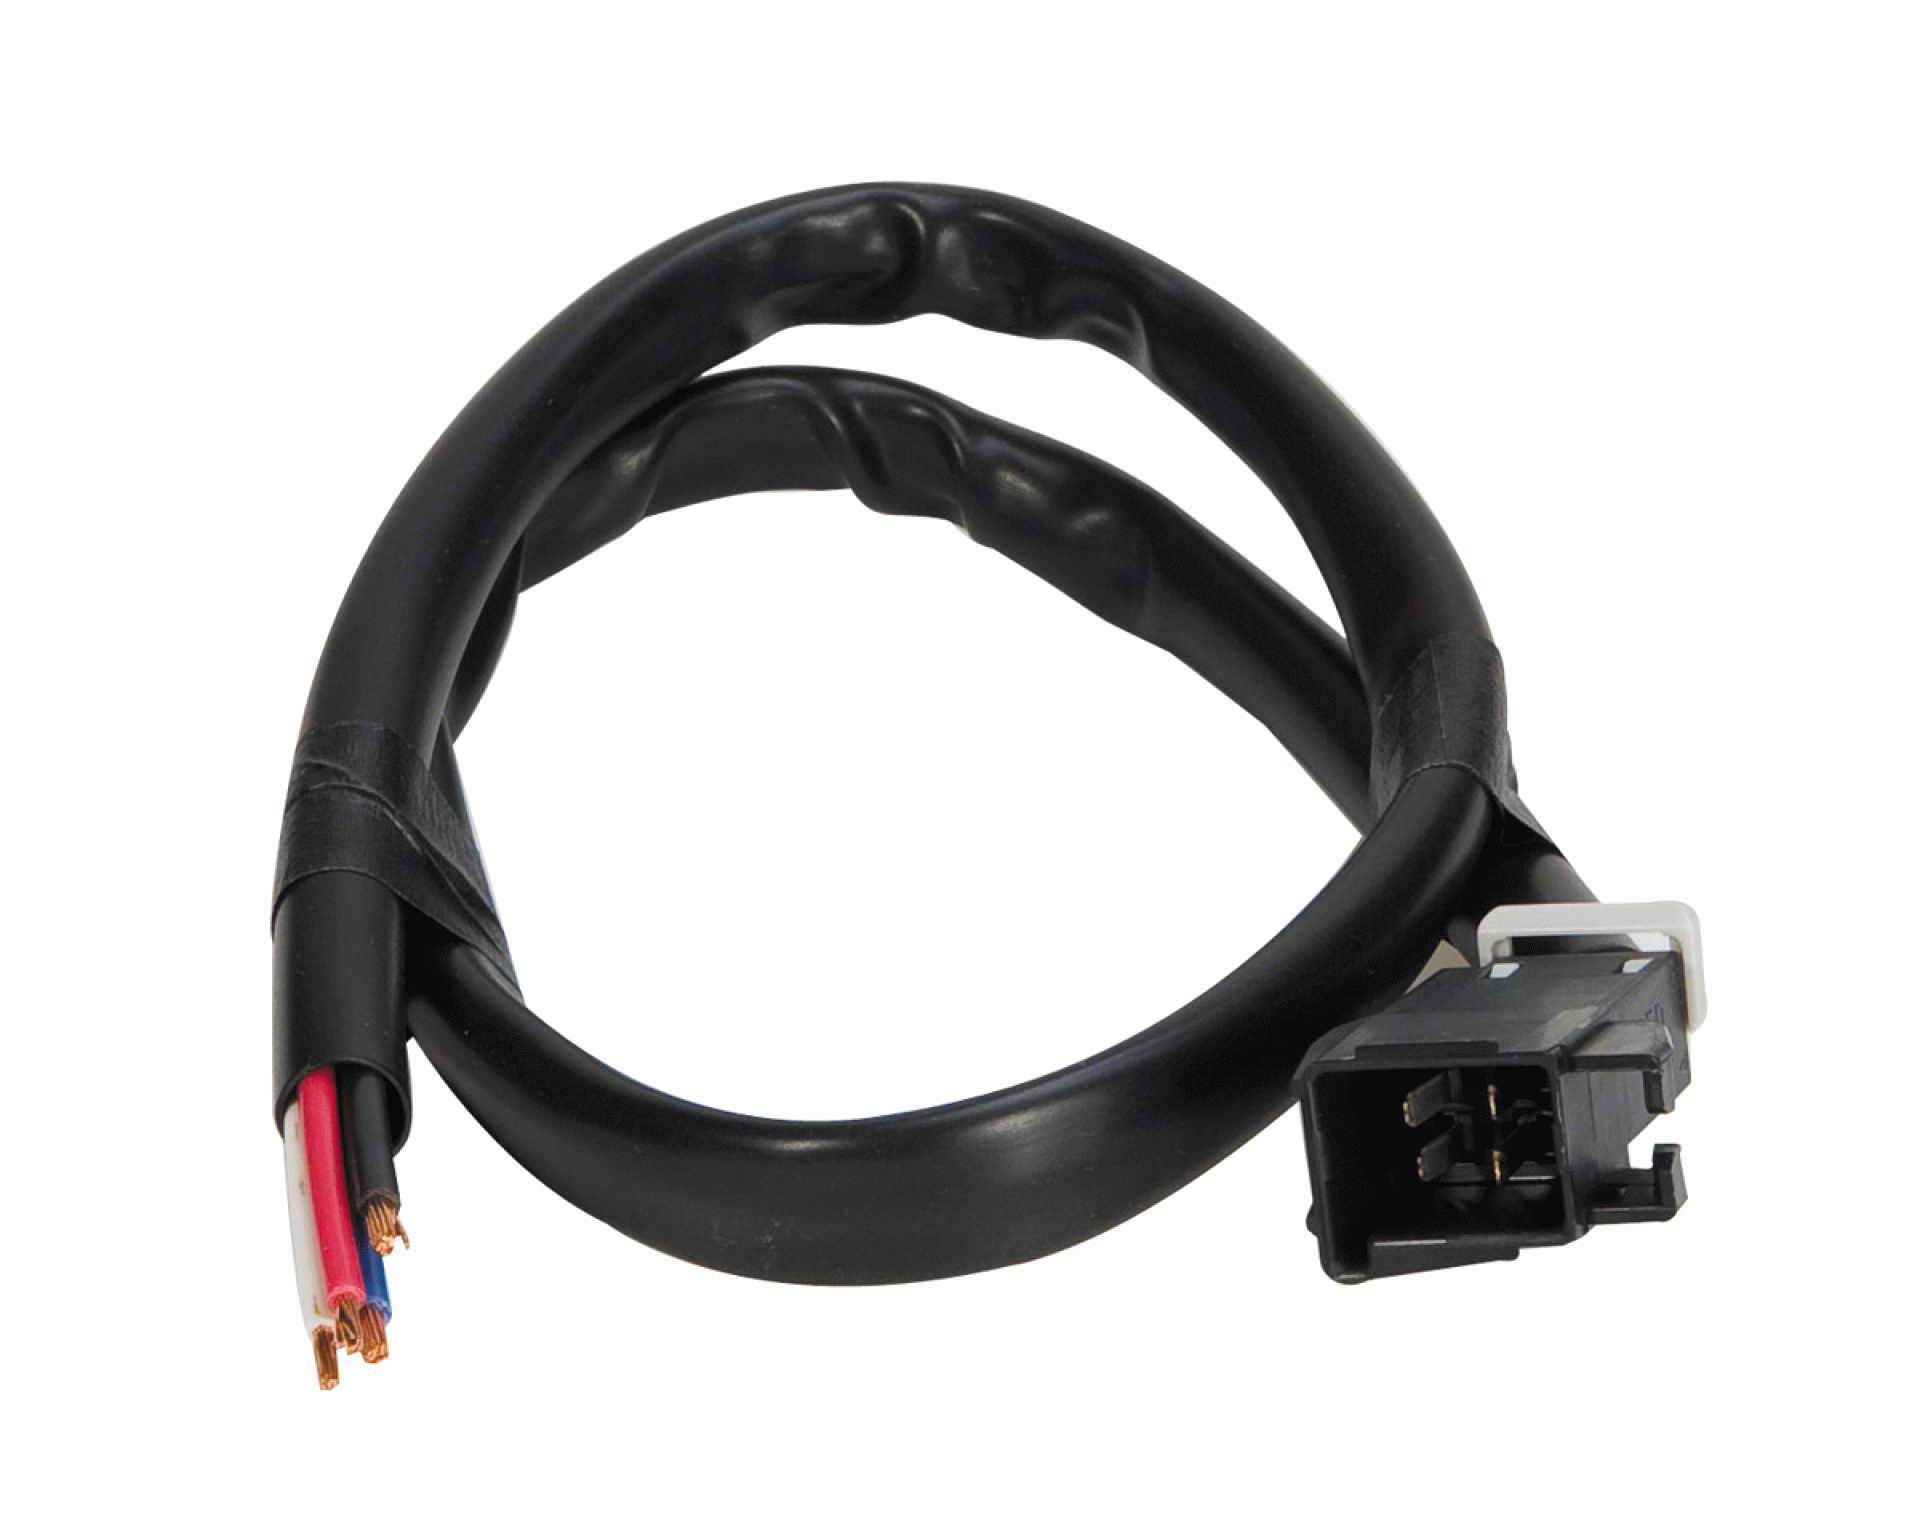 HAYES BRAKE CONTROLLER COMPANY | 81789HBC | WIRING HARNESS -HAYES UNIVERSAL